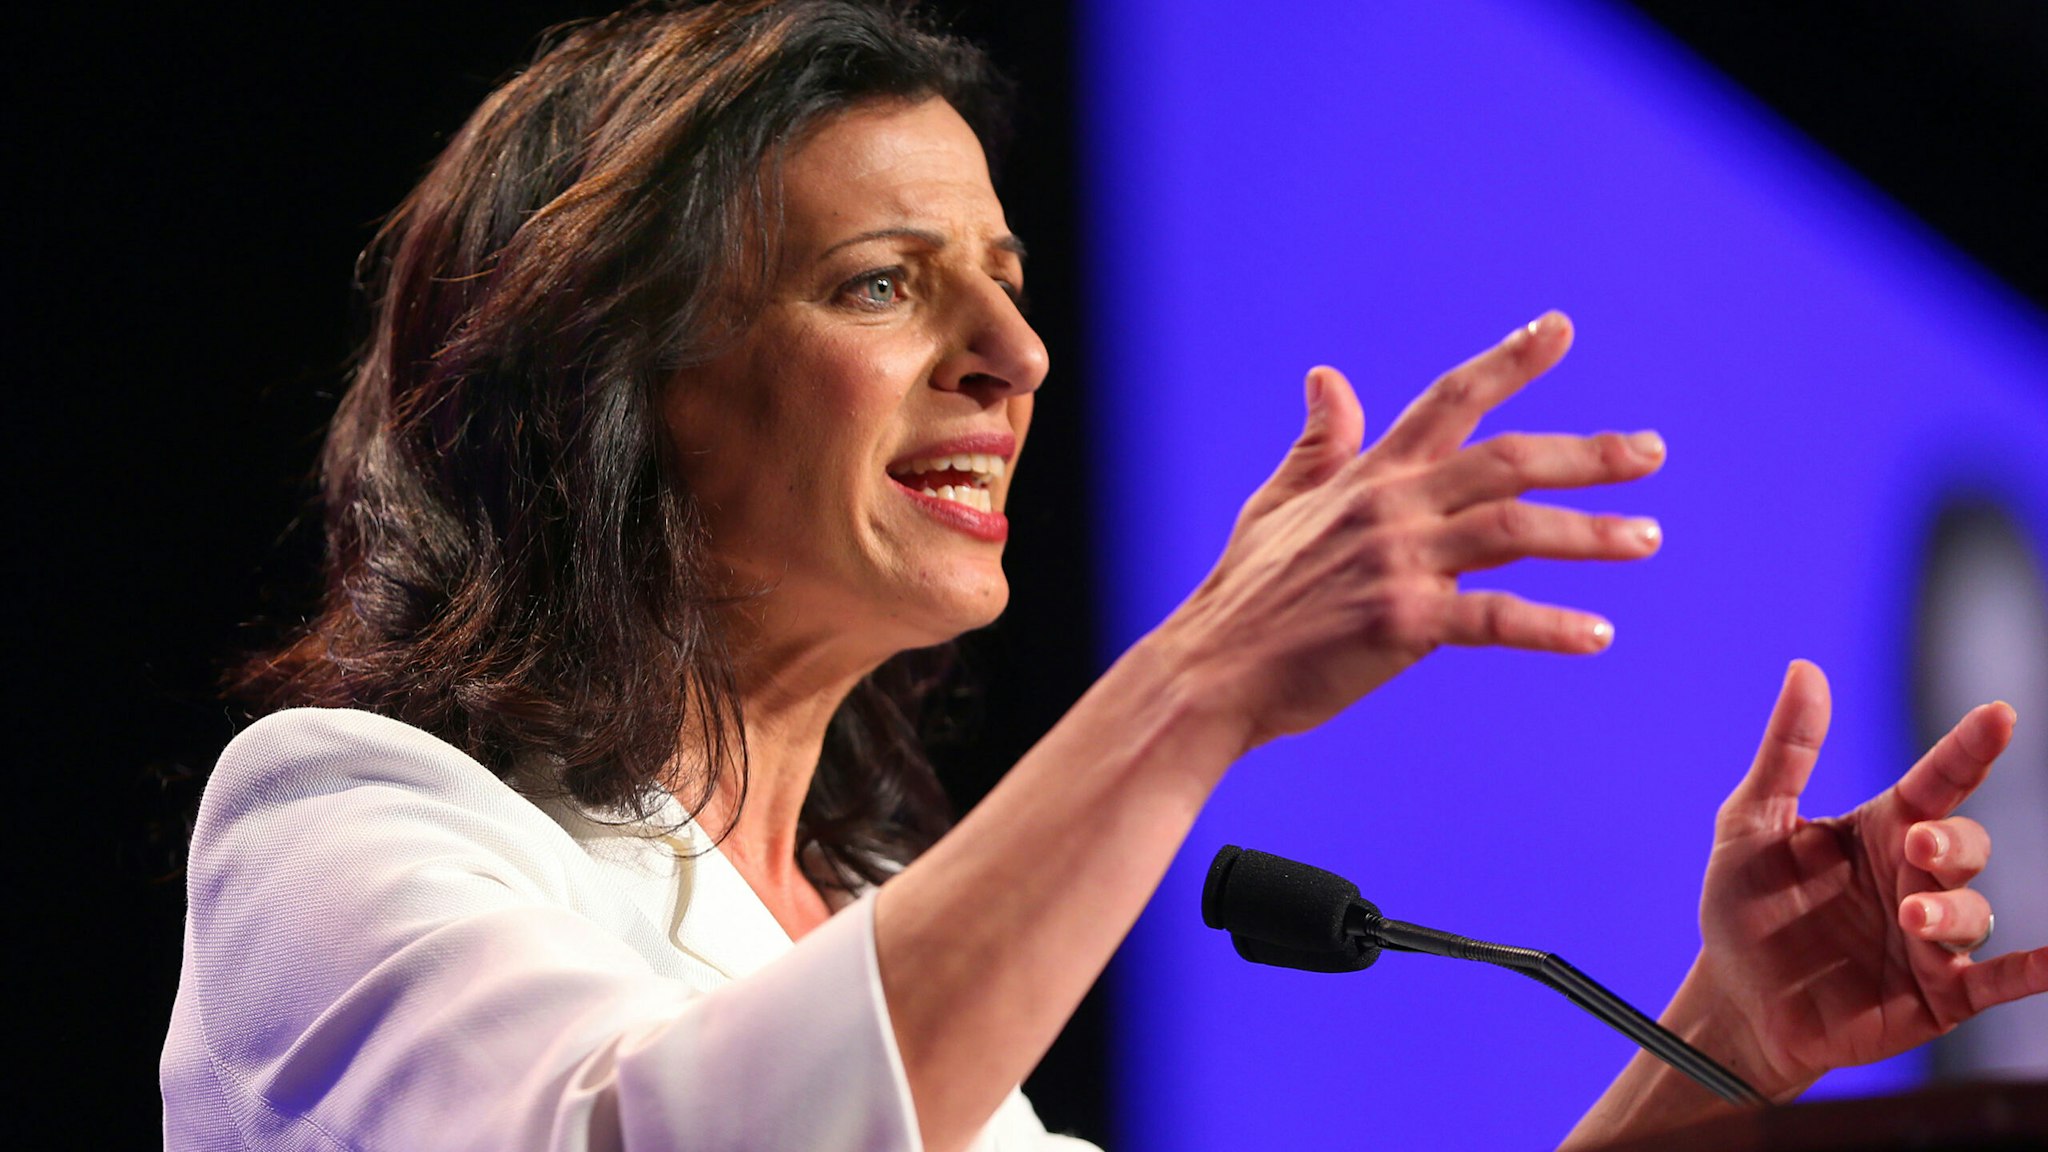 WORCESTER, MA - JUNE 14: Candidate for governor Juliette Kayyem speaks at the Democrat State Convention at the DCU Center in Worcester, Mass. (Photo by John Tlumacki/The Boston Globe via Getty Images)